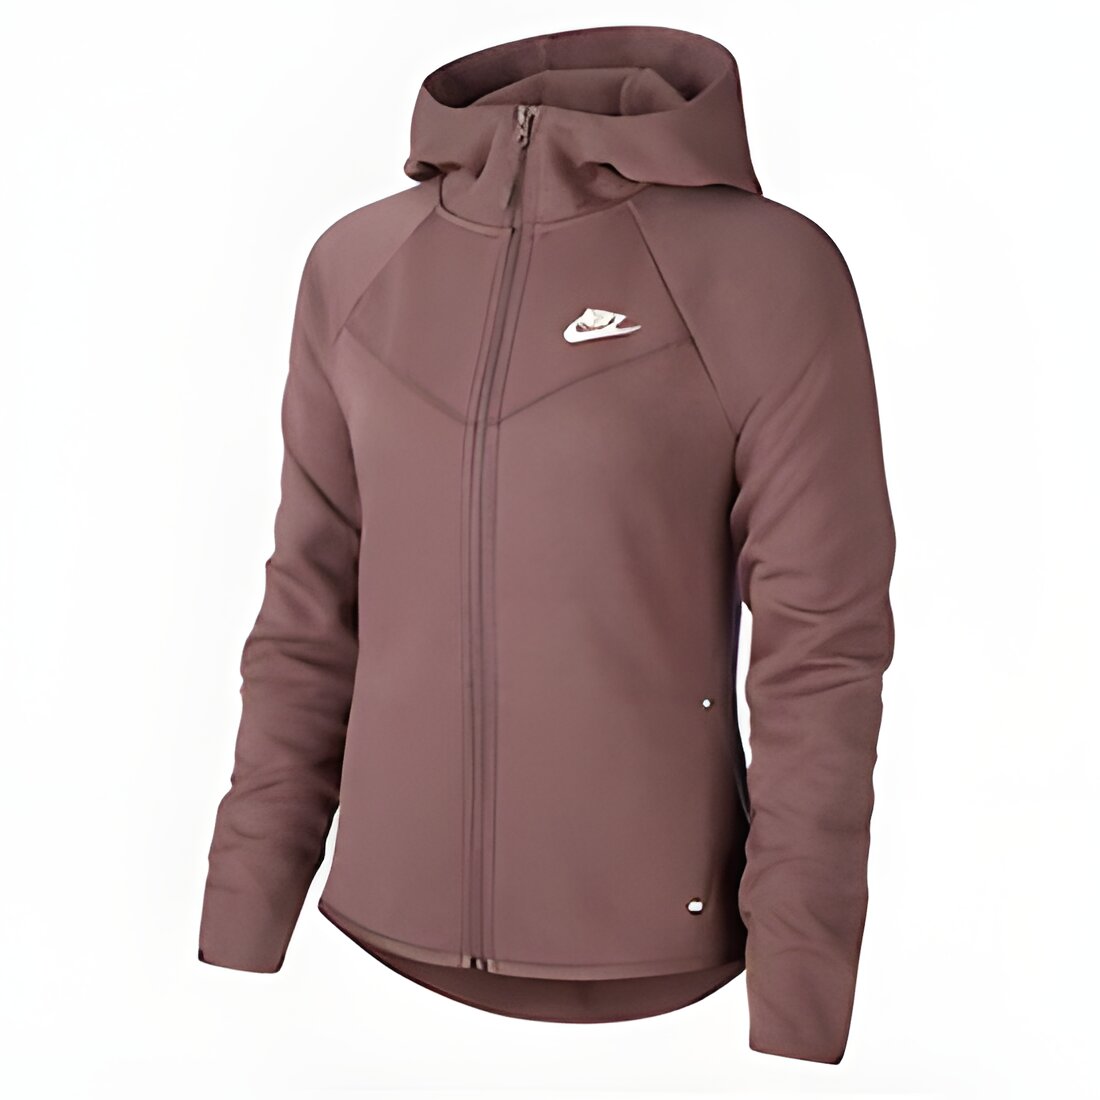 Free Nike Clothing Samples For Product Testers